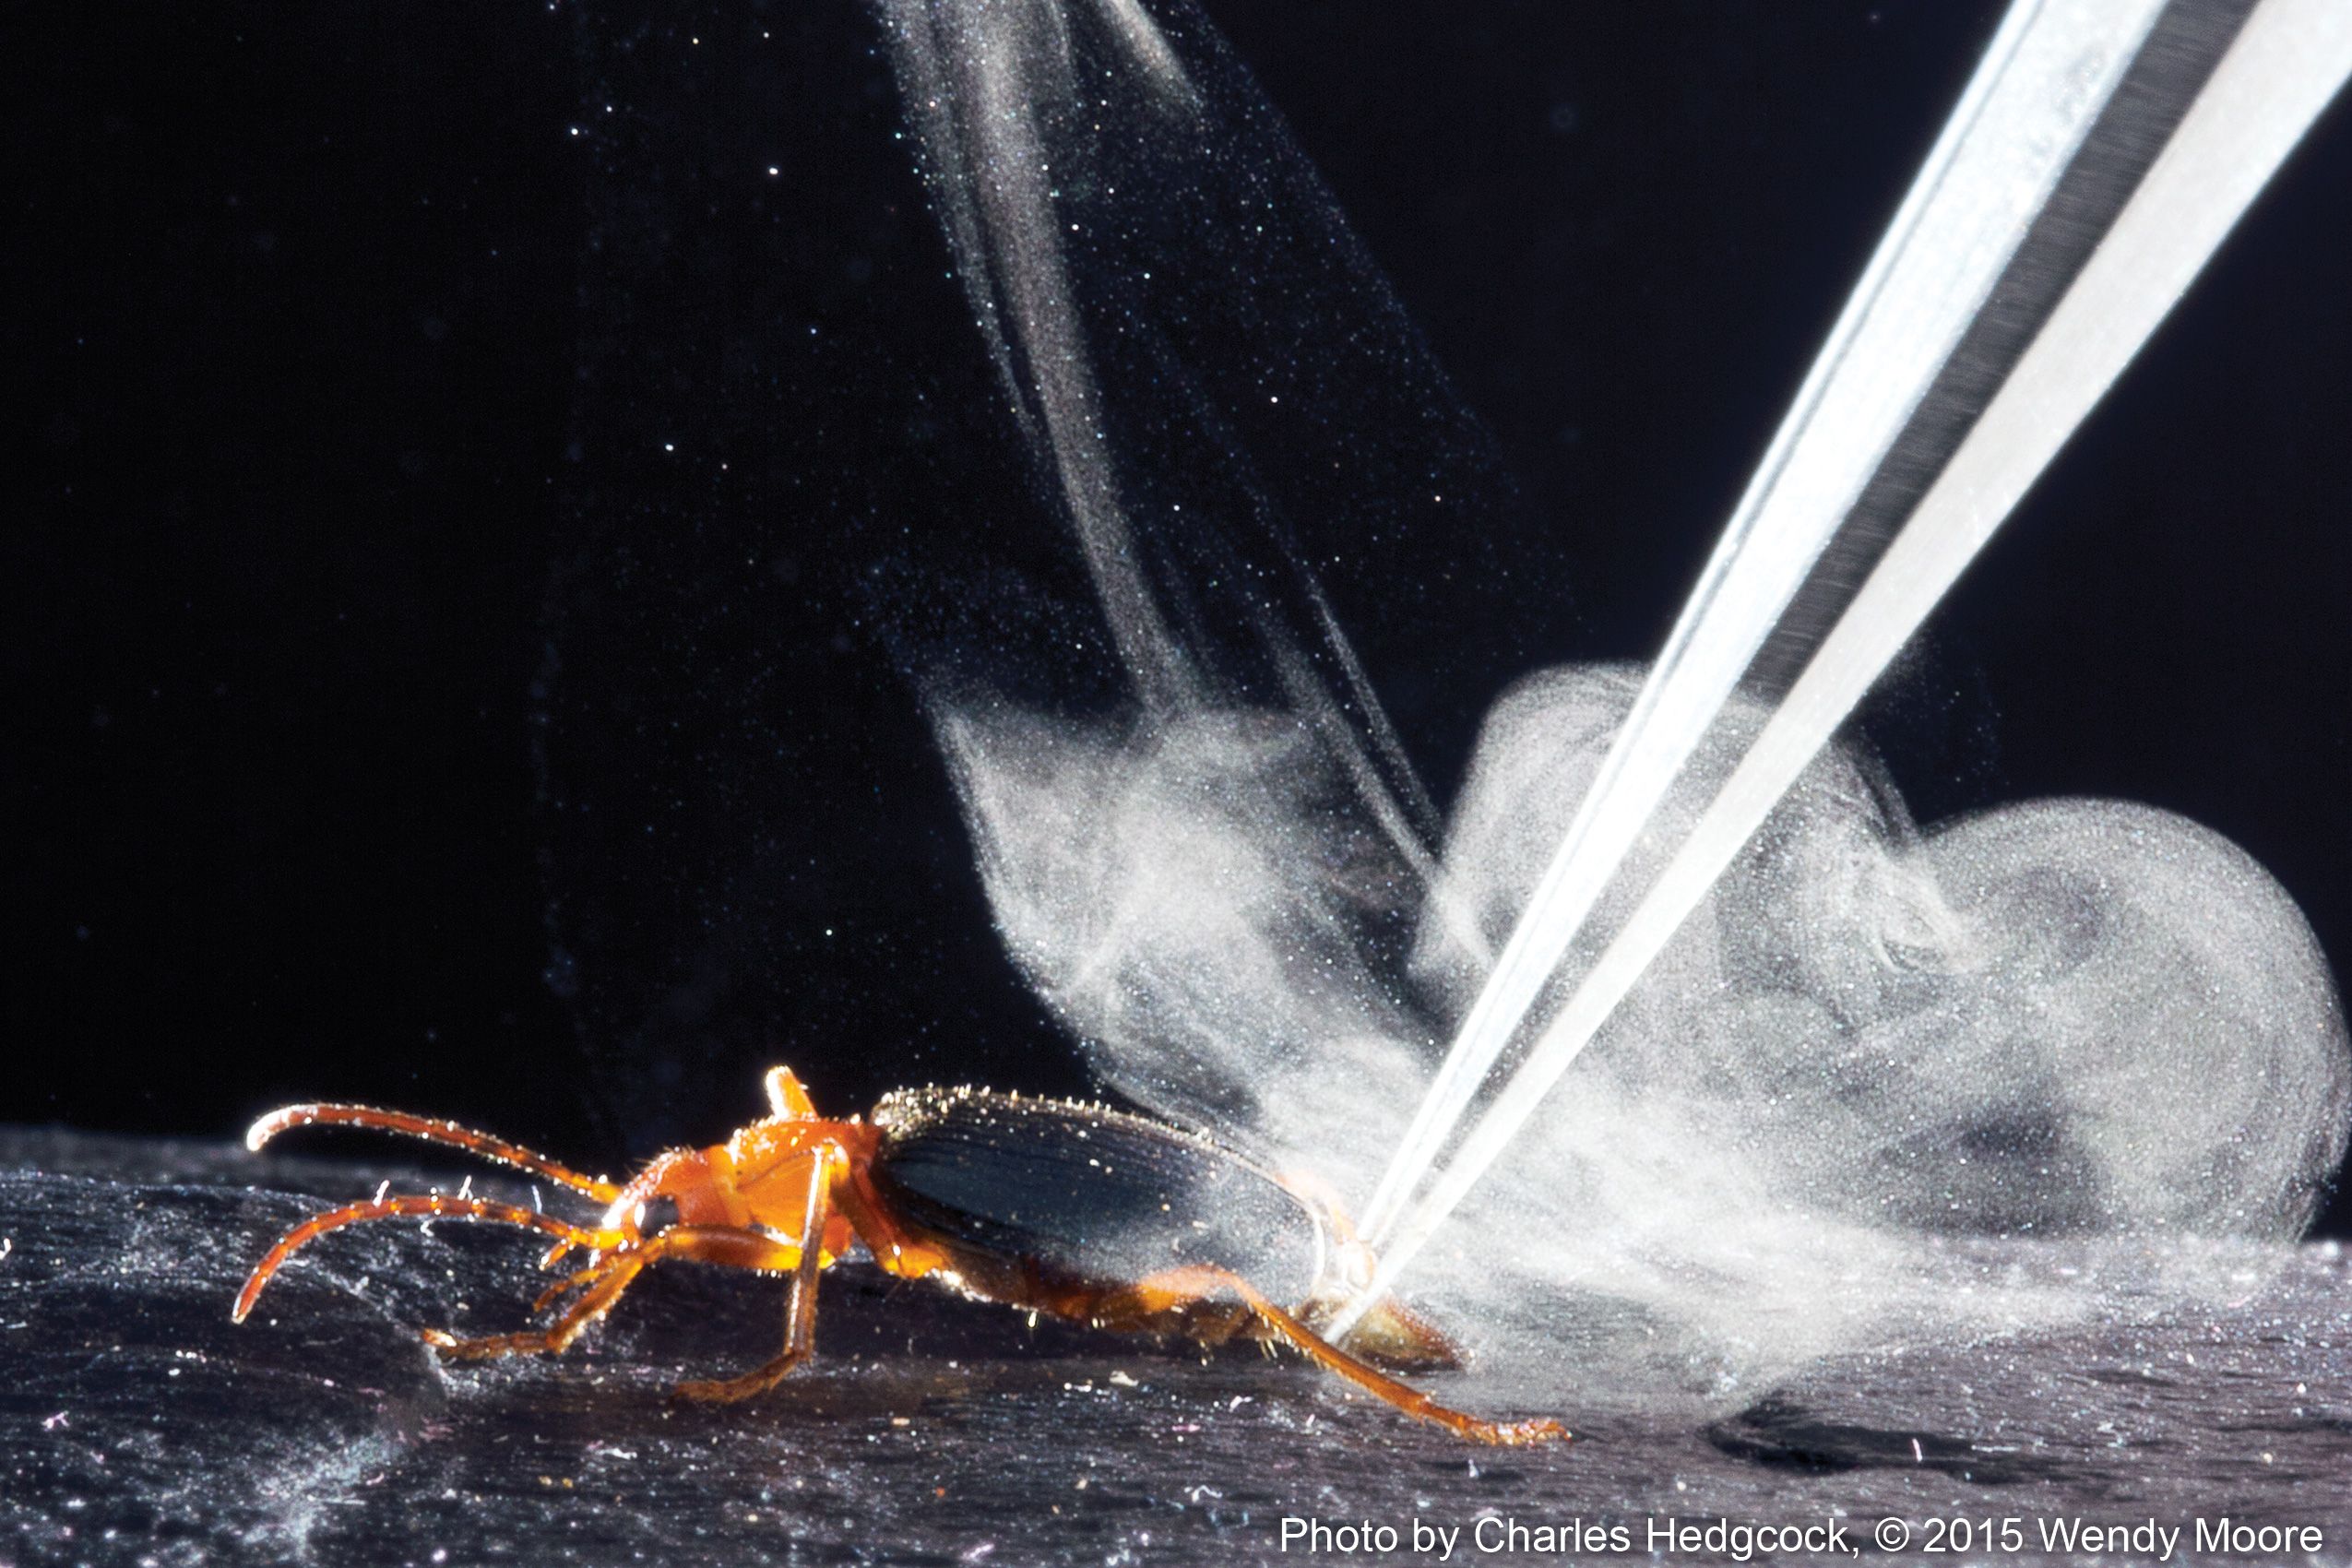 Bombardier Beetle Fires An Explosive Chemical From Its Rear